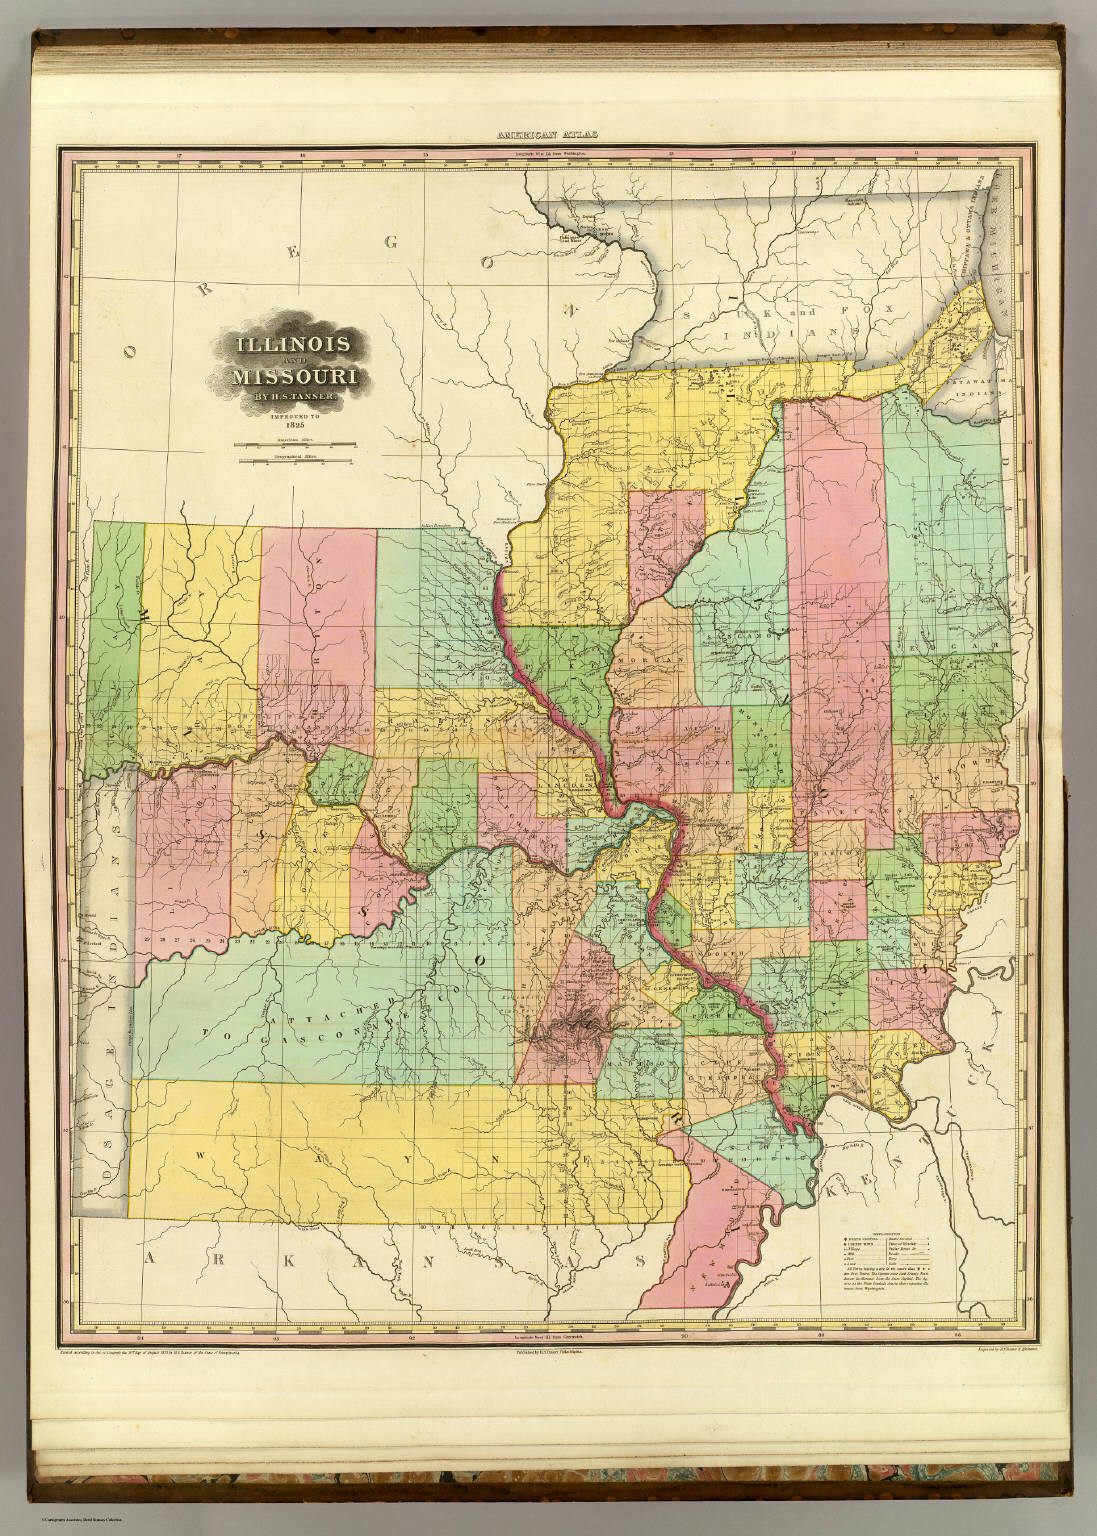 Illinois And Missouri David Rumsey Historical Map Collection 3587